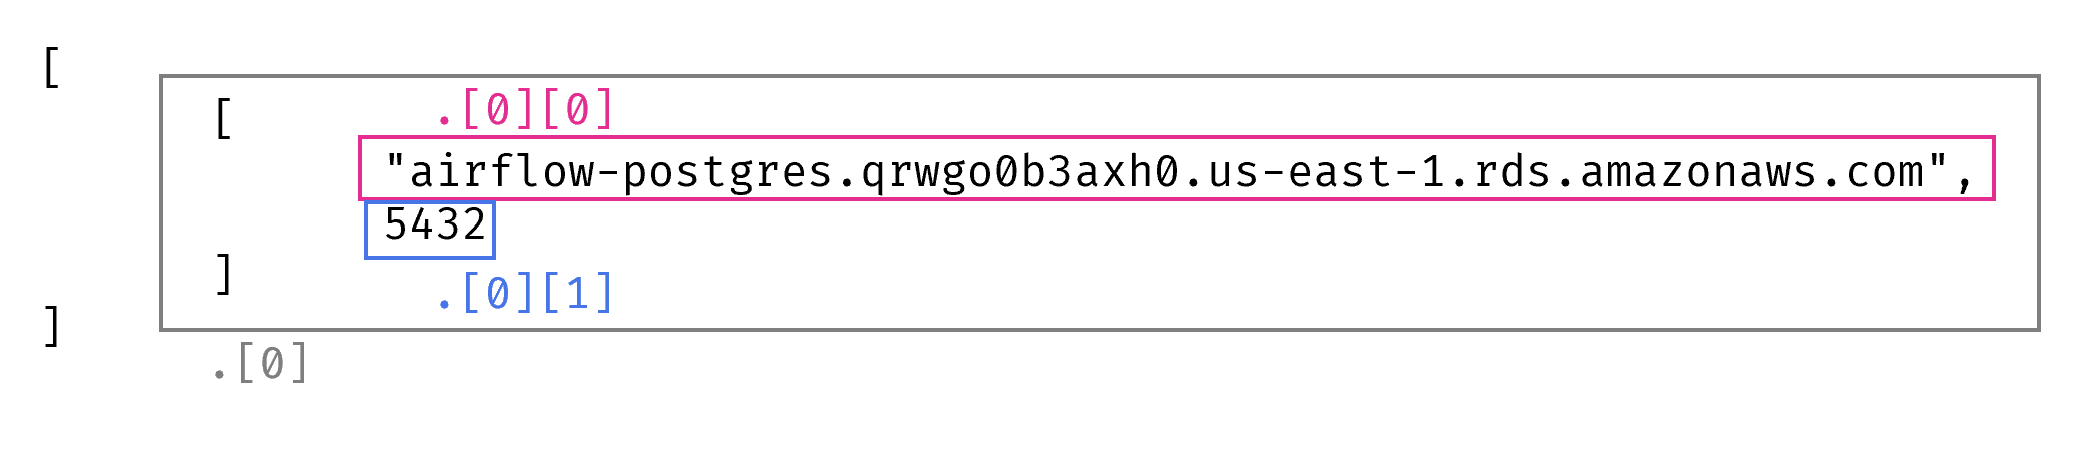 JSON array showing two elements highlighted. The first element is a URL string ‘airflow-postgres.qrwgo@b3axh0.us-east-1.rds.amazonaws.com’ in pink, indicating a database connection string for an AWS RDS instance. The second element is the port number ‘5432’, commonly used for PostgreSQL databases, highlighted in blue.